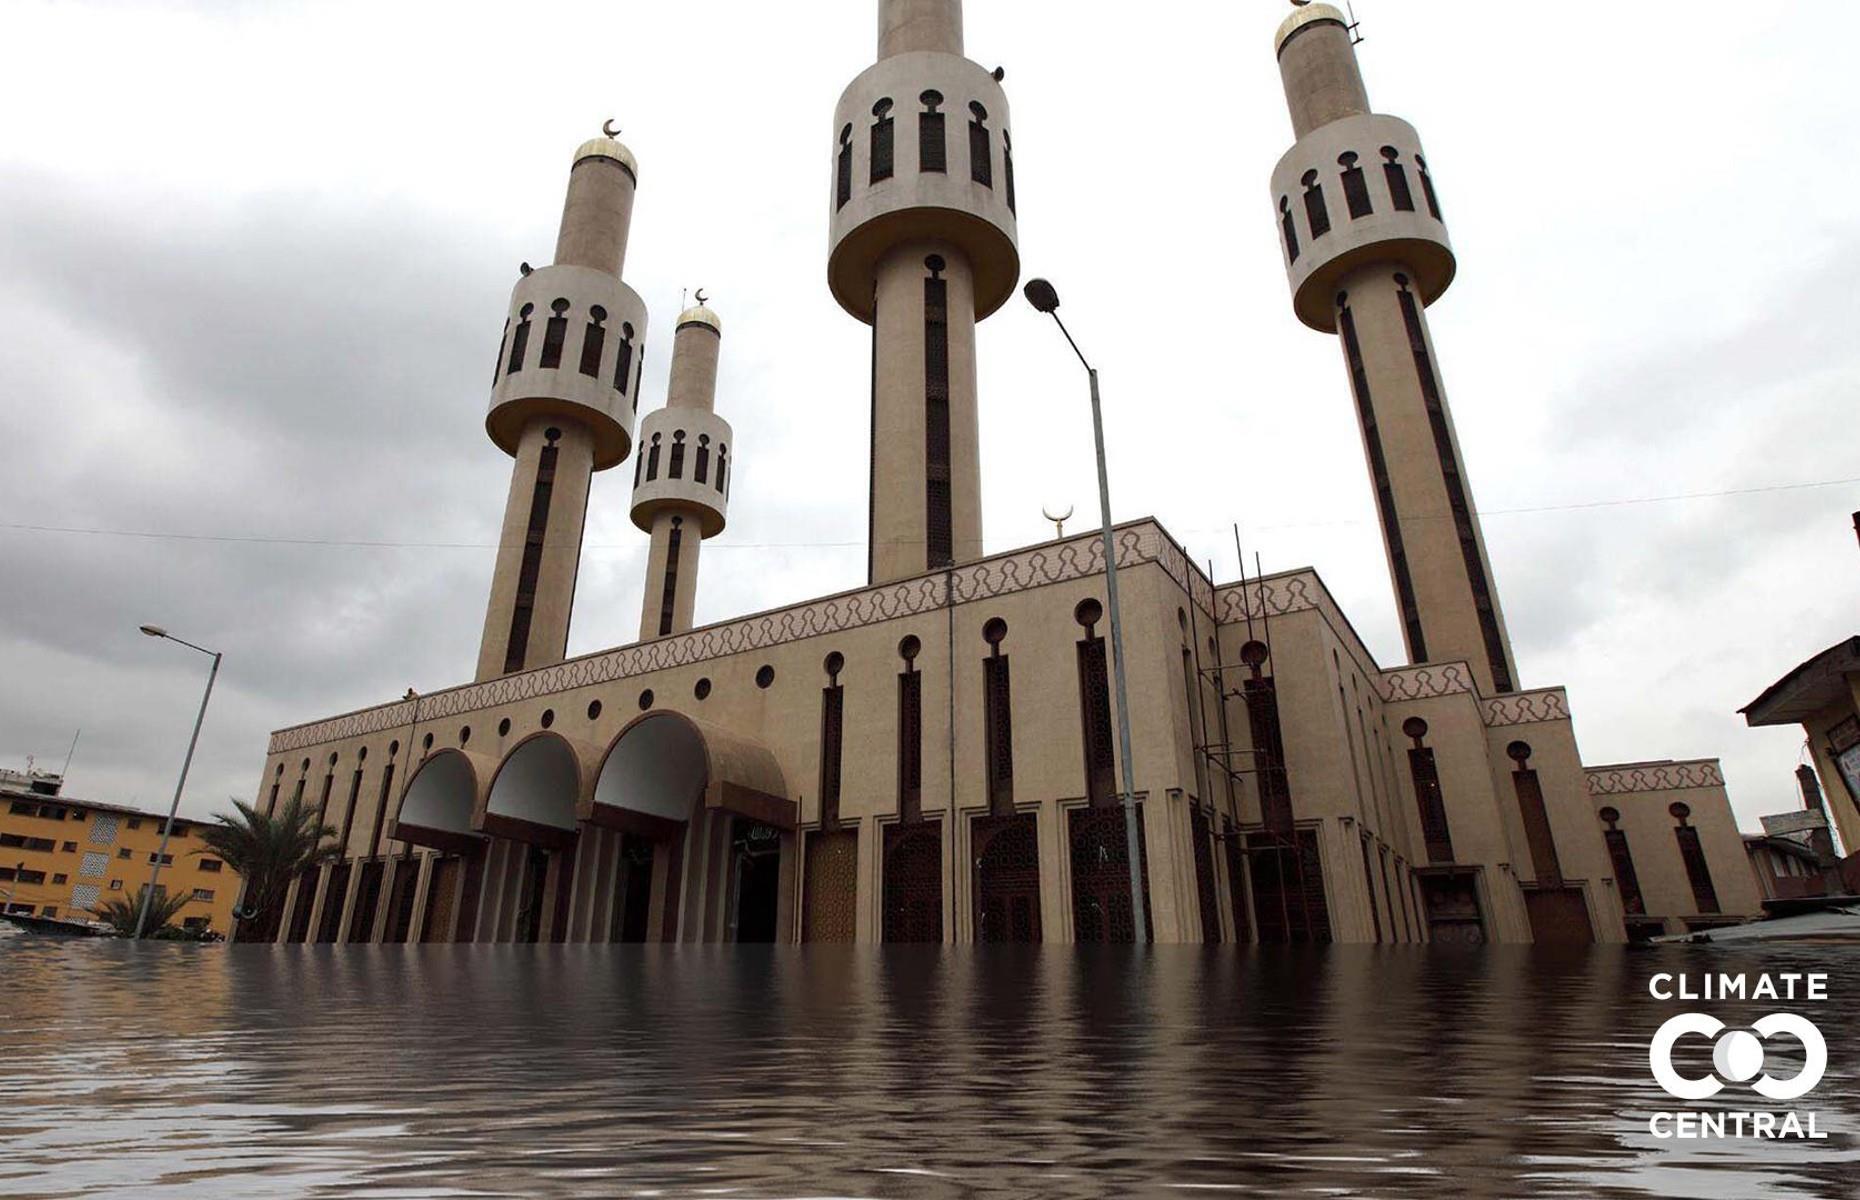 Situated on Nigeria’s west coast bordering Lagos Lagoon, the coastal capital is headed for severe damage in the event of 3°C (5.4°F) of climate change. The streets outside Lagos Central Mosque, pictured, are usually filled with people, but this apocalyptic vision of the future will see them completely submerged in water instead.